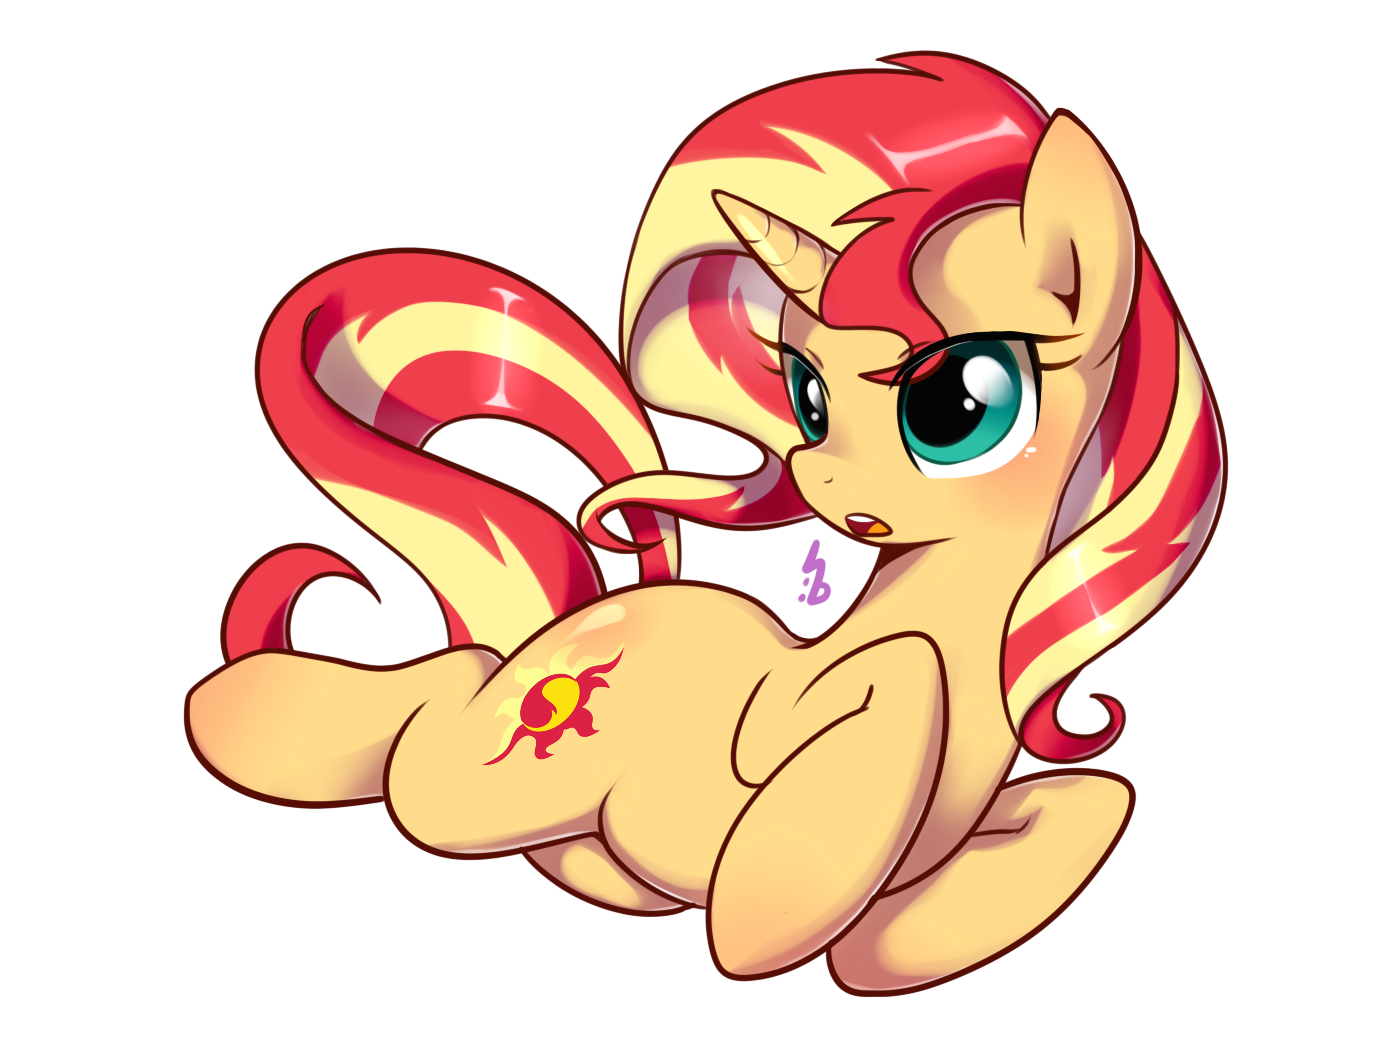 sunset_shimmer_by_haden_2375-davuza8.png